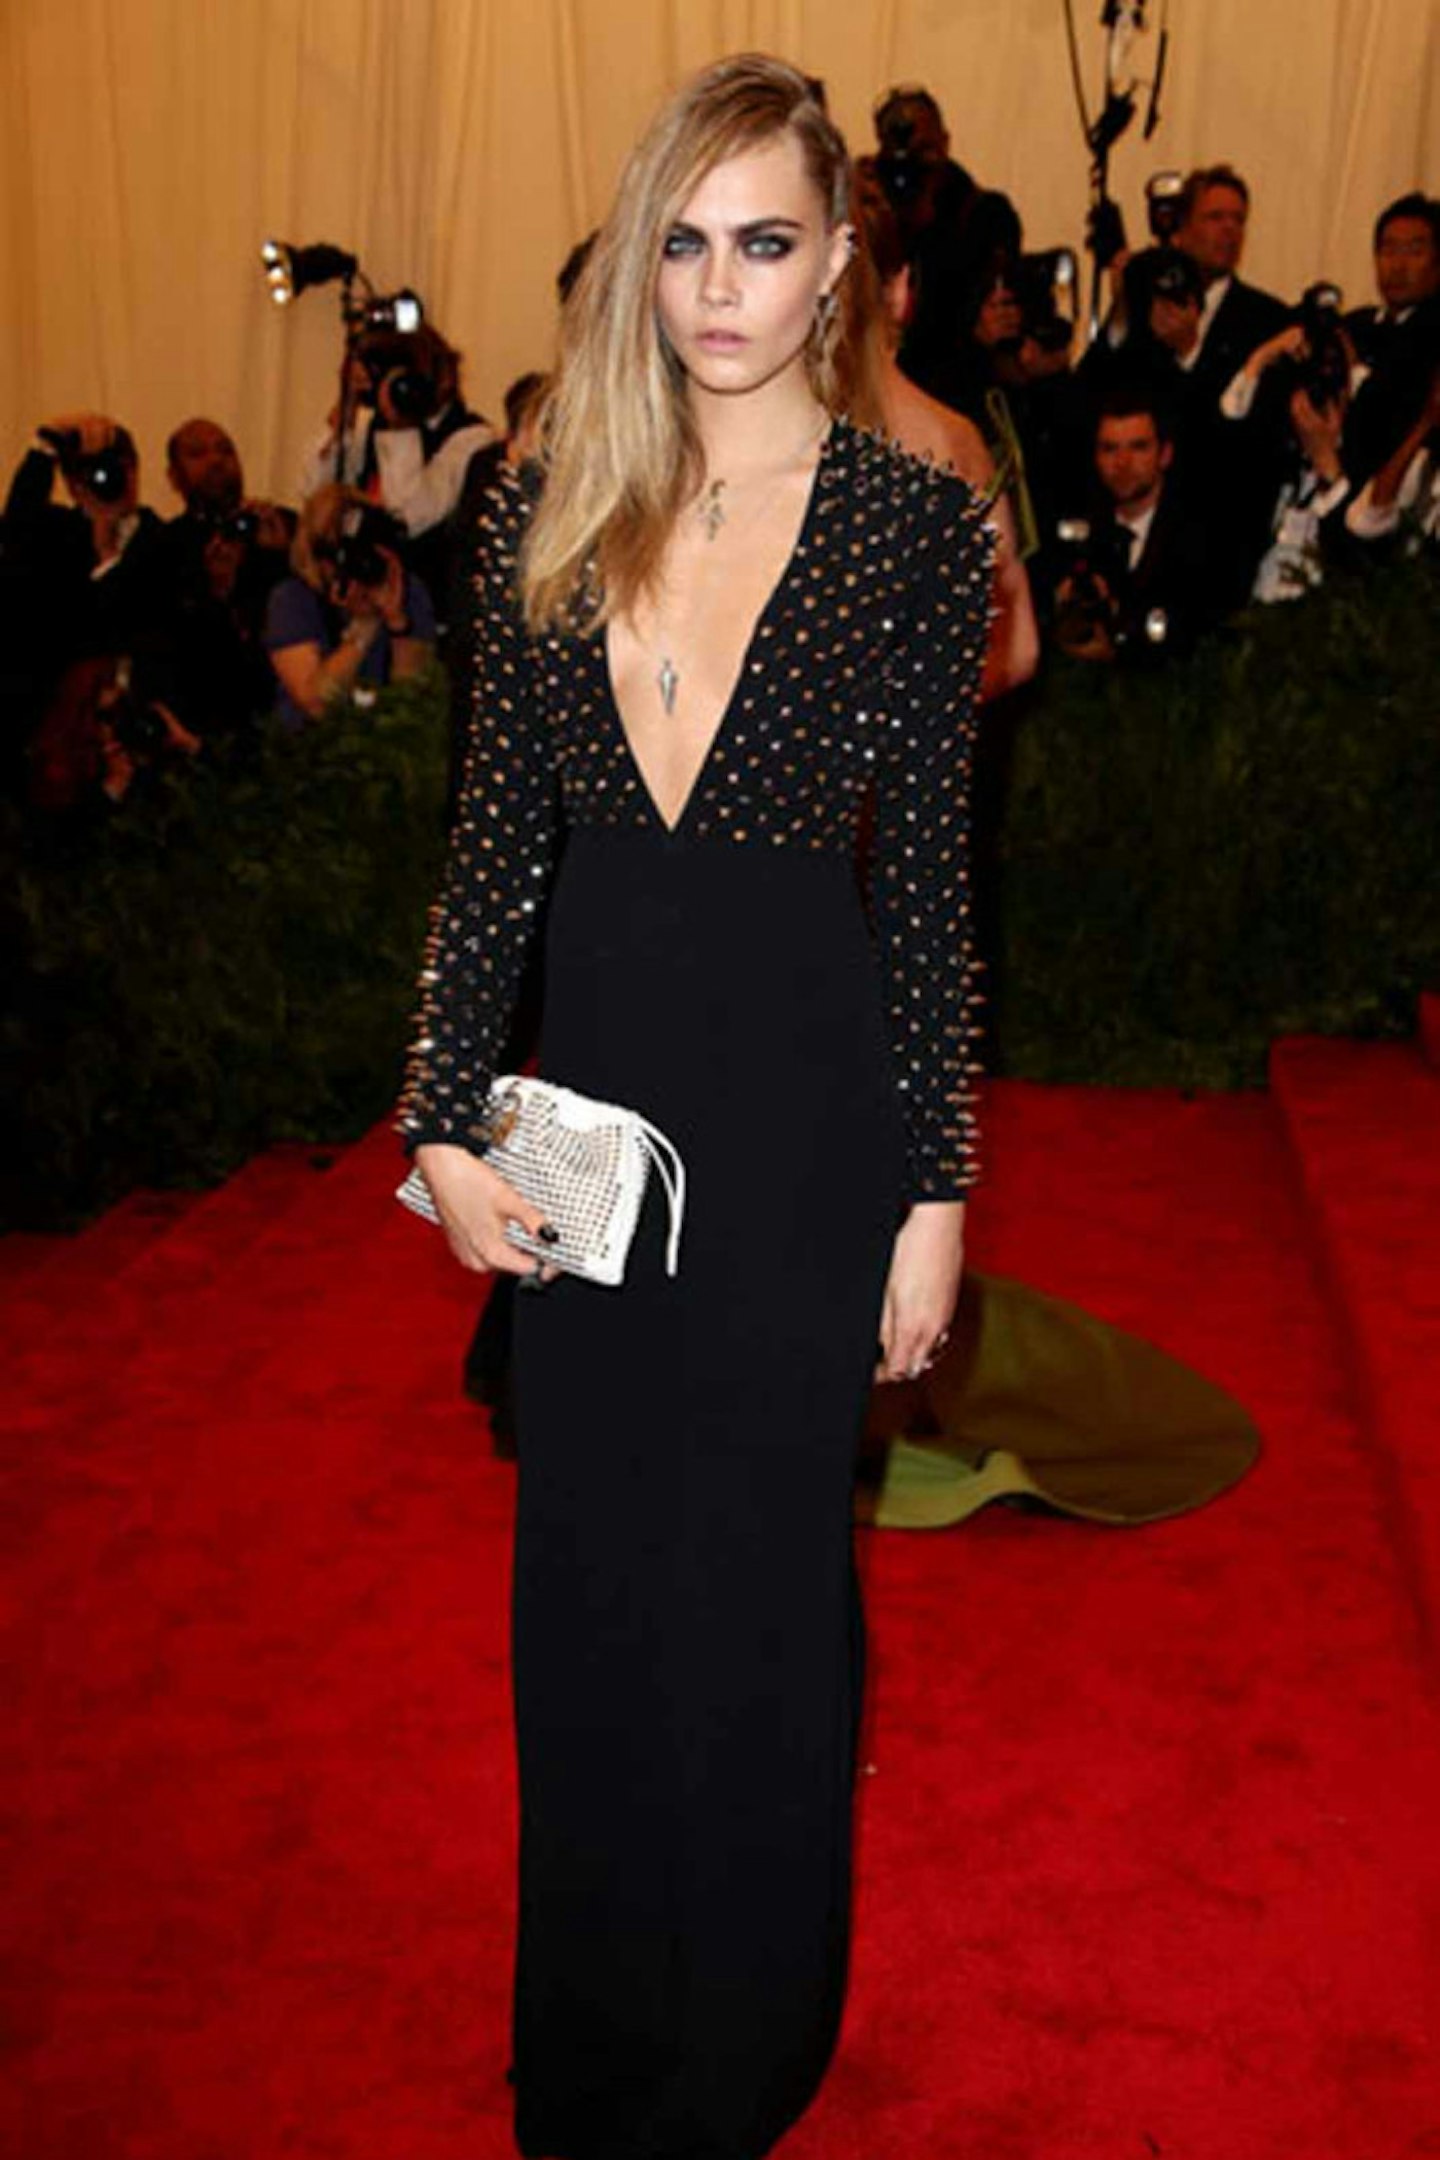 Cara Delevingne style burberry dress black spiked